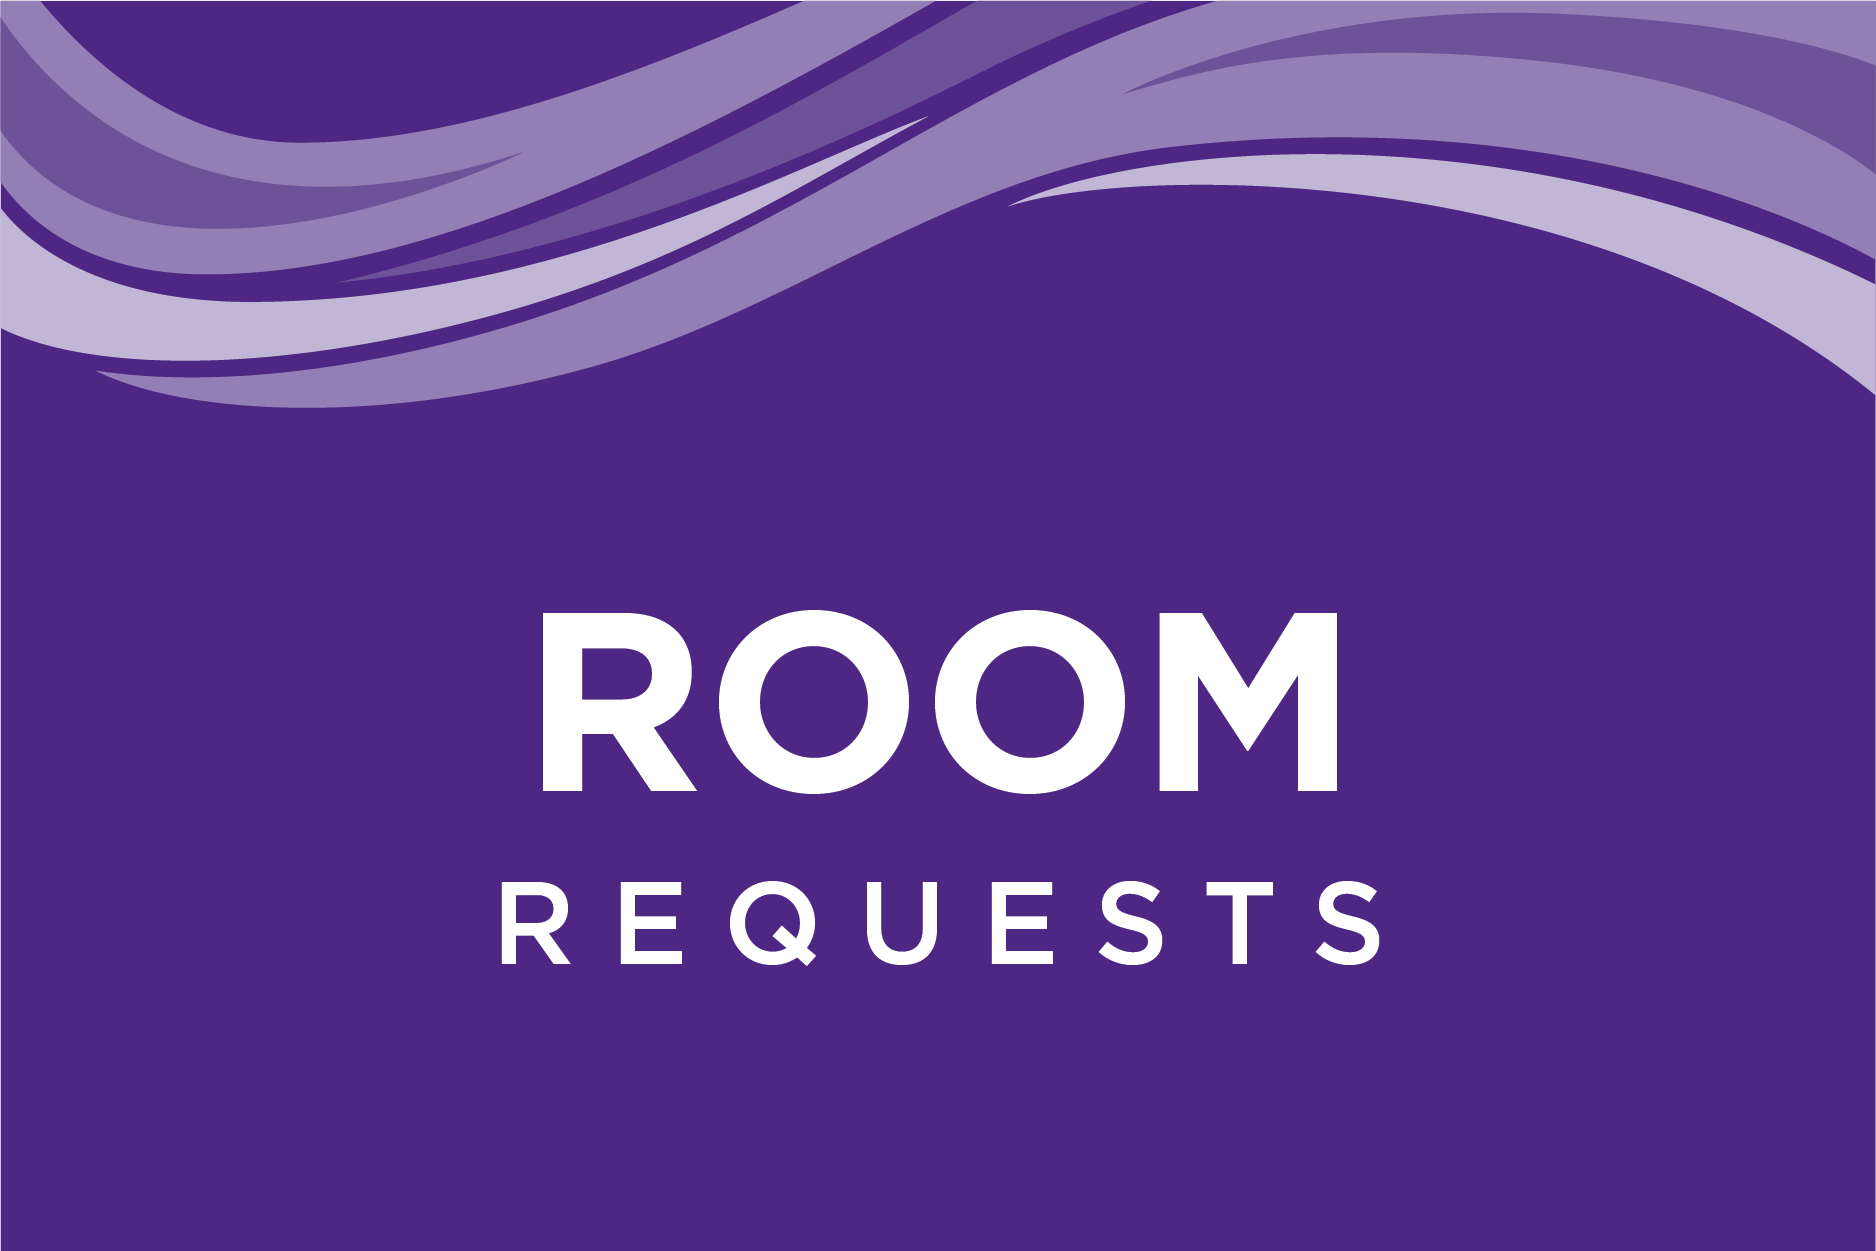 Request a room for an event at UW-Whitewater